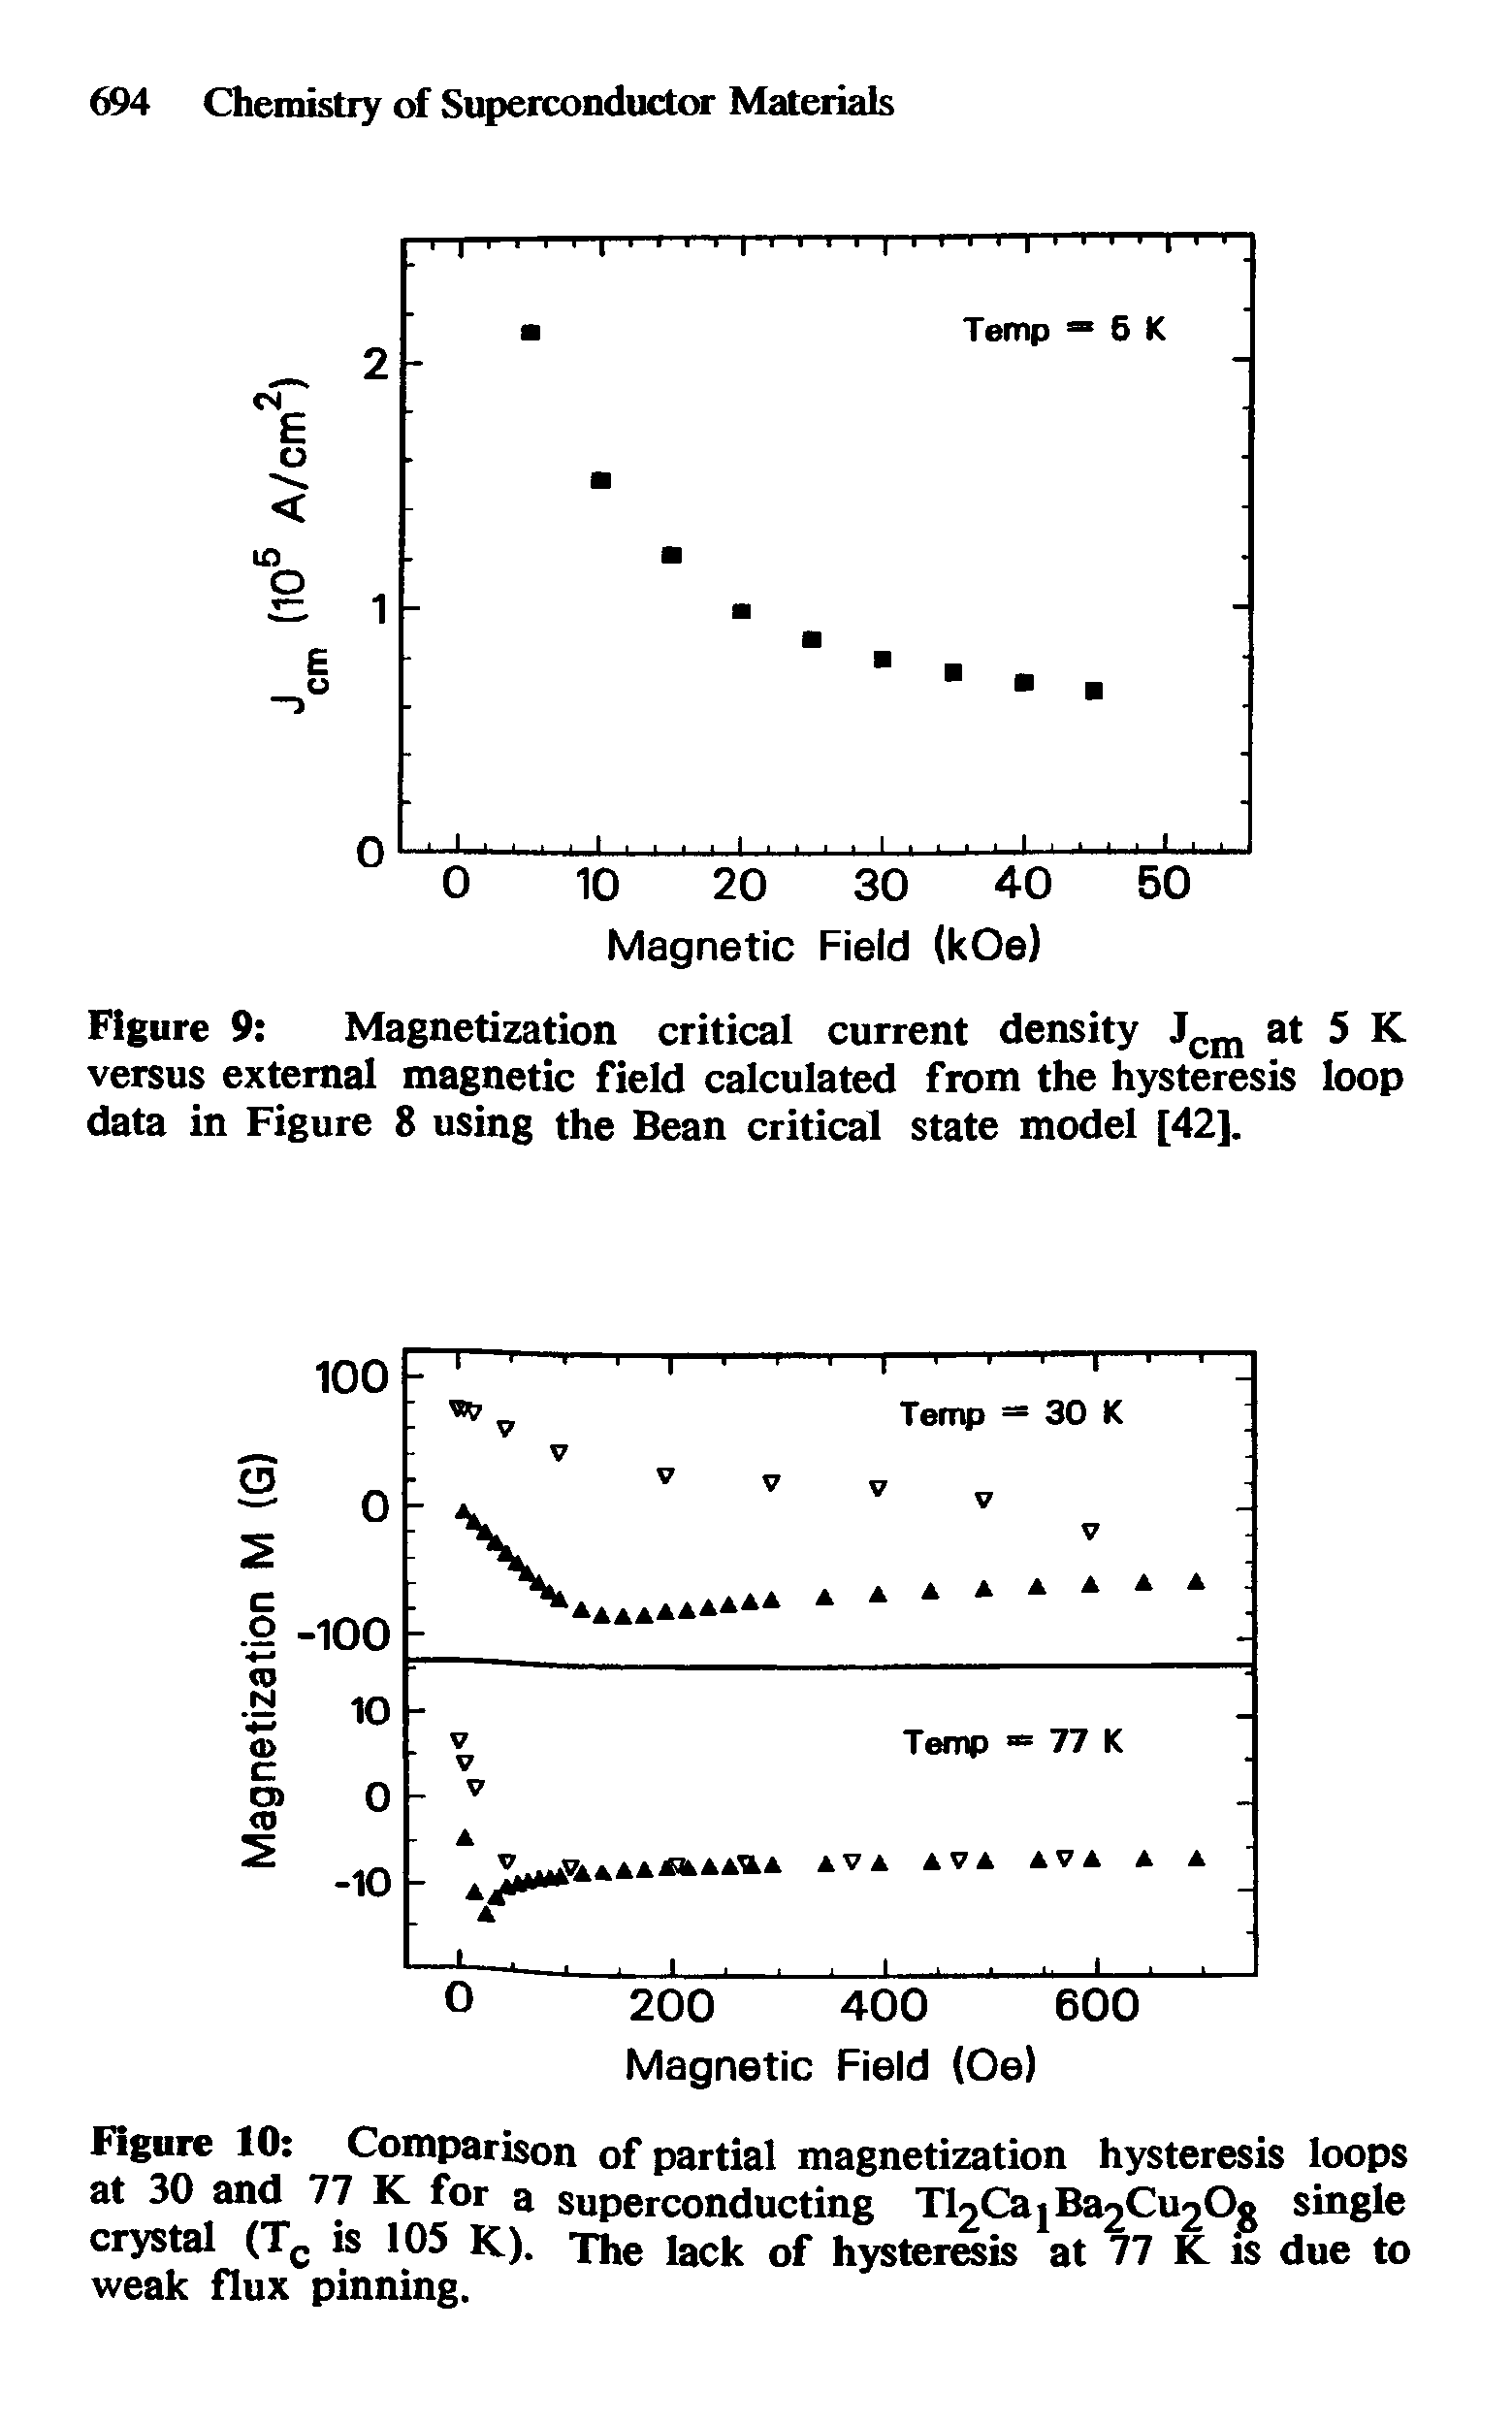 Figure 10 Comparison of partial magnetization hysteresis loops at 30 and 77 K for a superconducting T Ca j Ba2Cu20o single crystal (Tc is 105 K). The lack of hysteresis at 77 K is due to weak flux pinning.